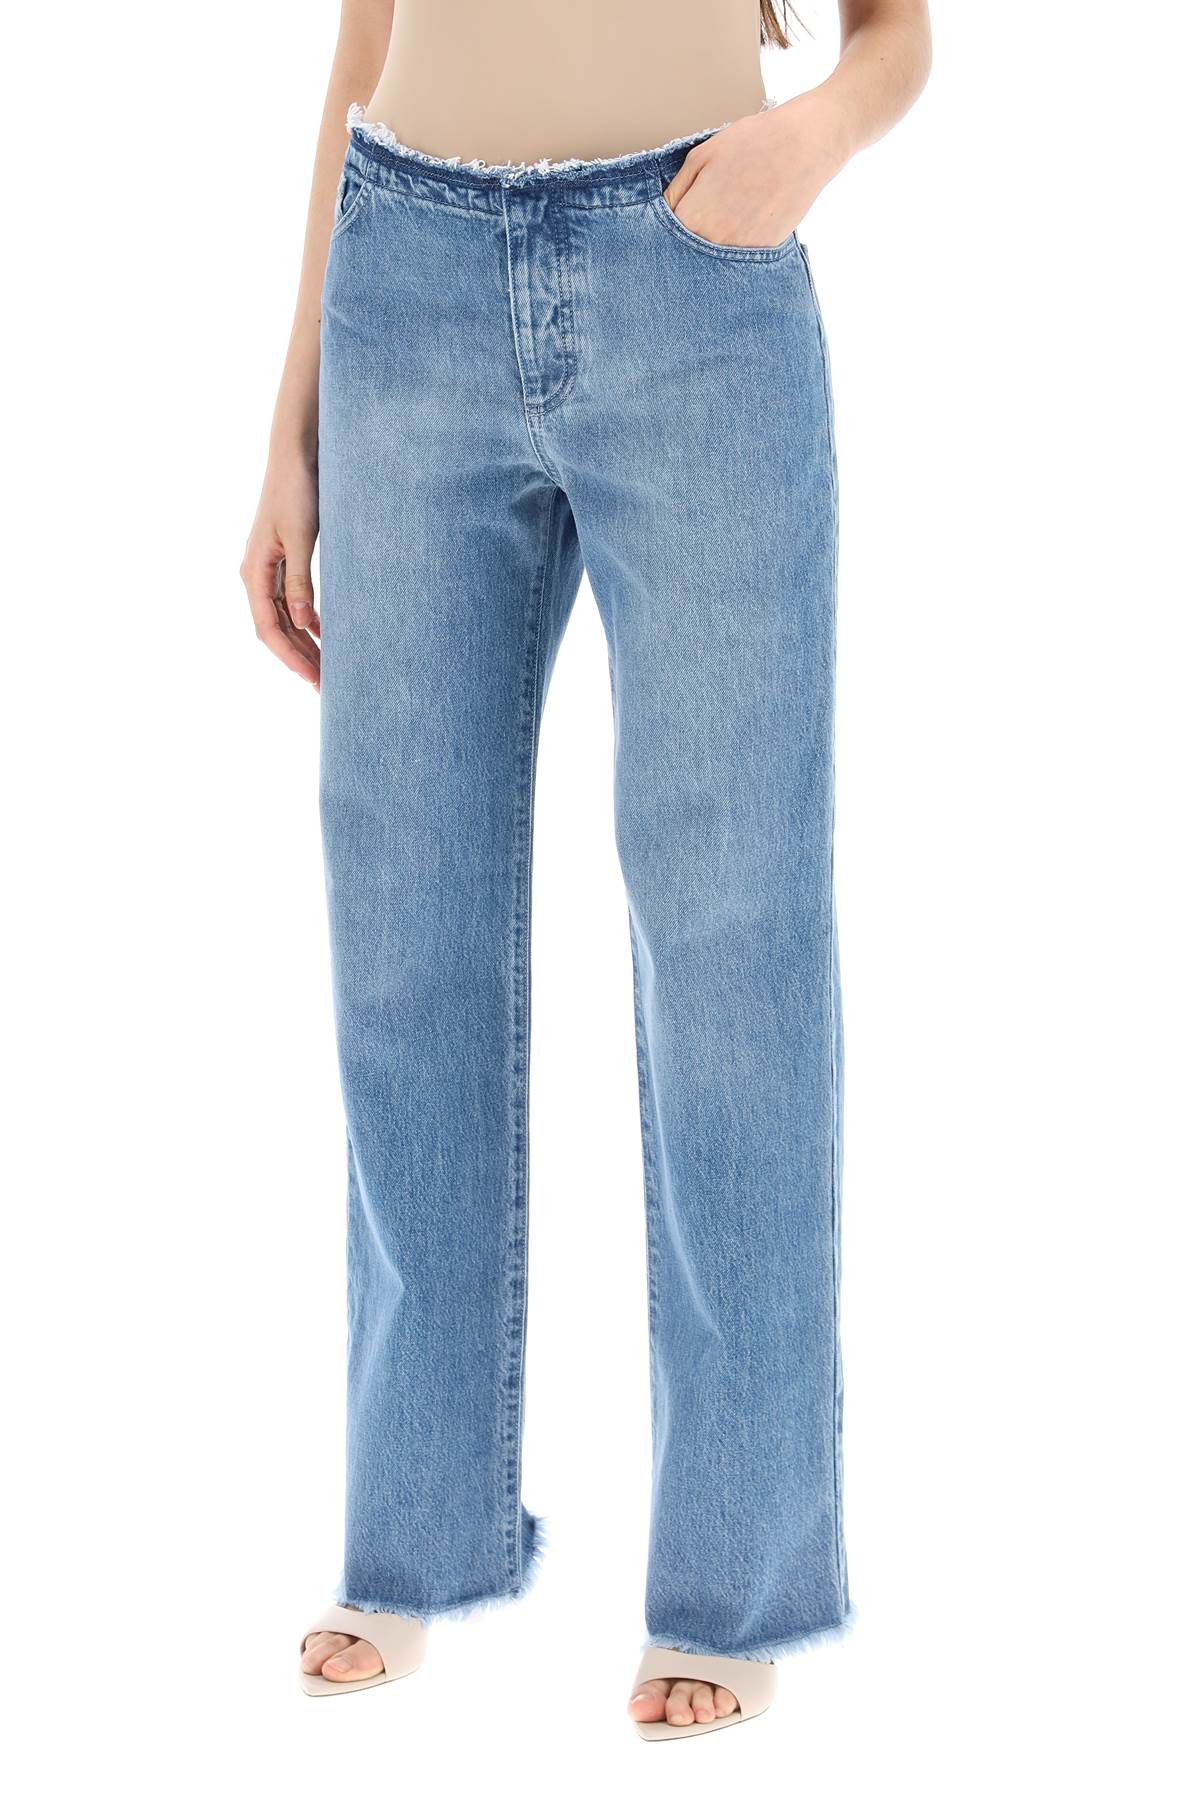 Mvp wardrobe straight leg levant jeans with a-3